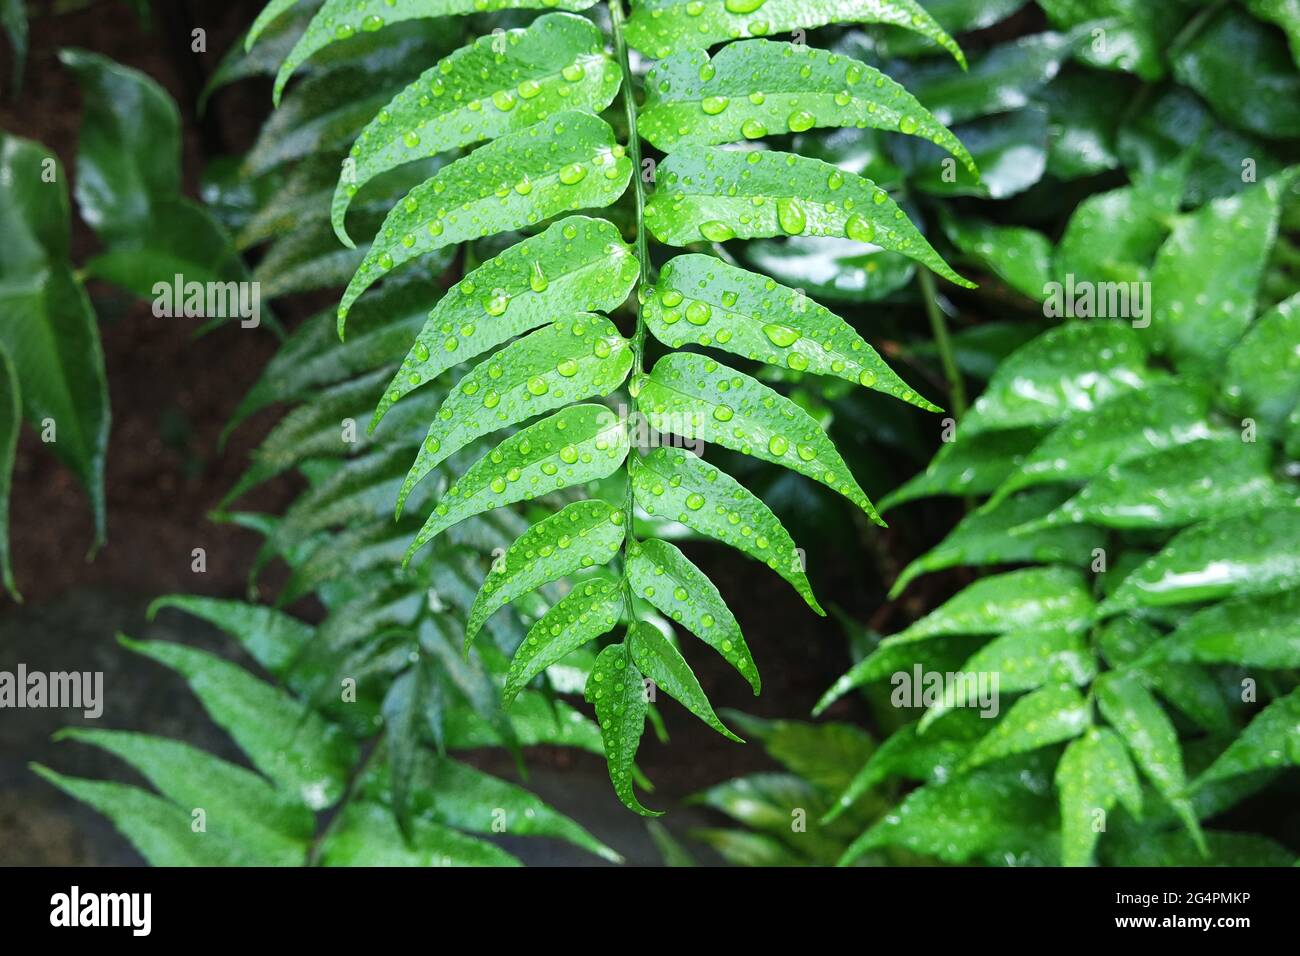 Water drops on green leaves Cyrtomium caryotideum Stock Photo